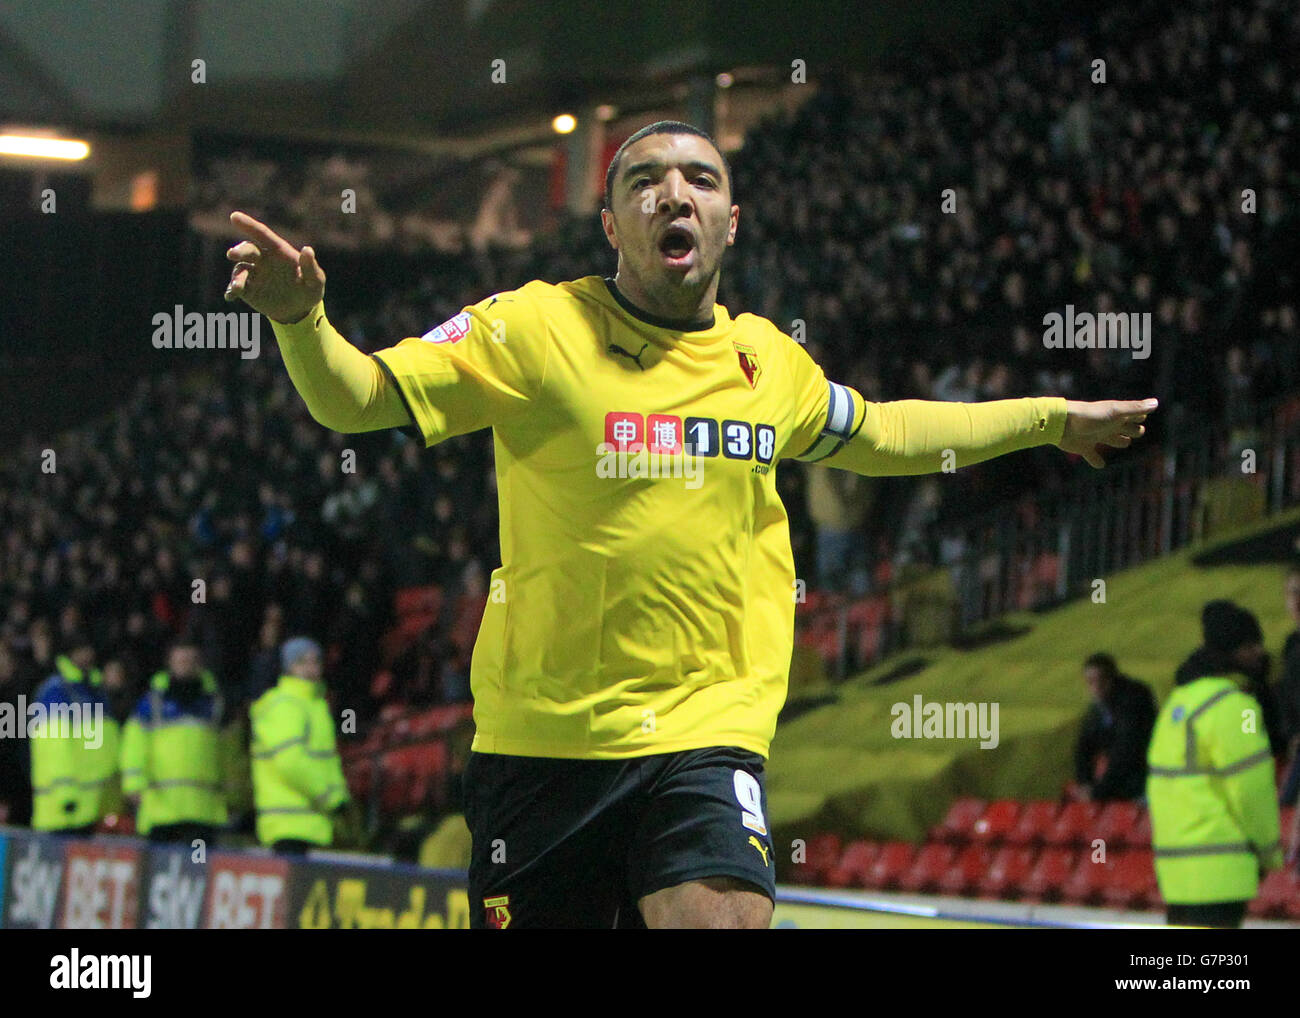 Soccer - Sky Bet Championship - Watford v Fulham - Vicarage Road. Watford's Troy Deeney celebrates scoring his side's first goal of the game Stock Photo